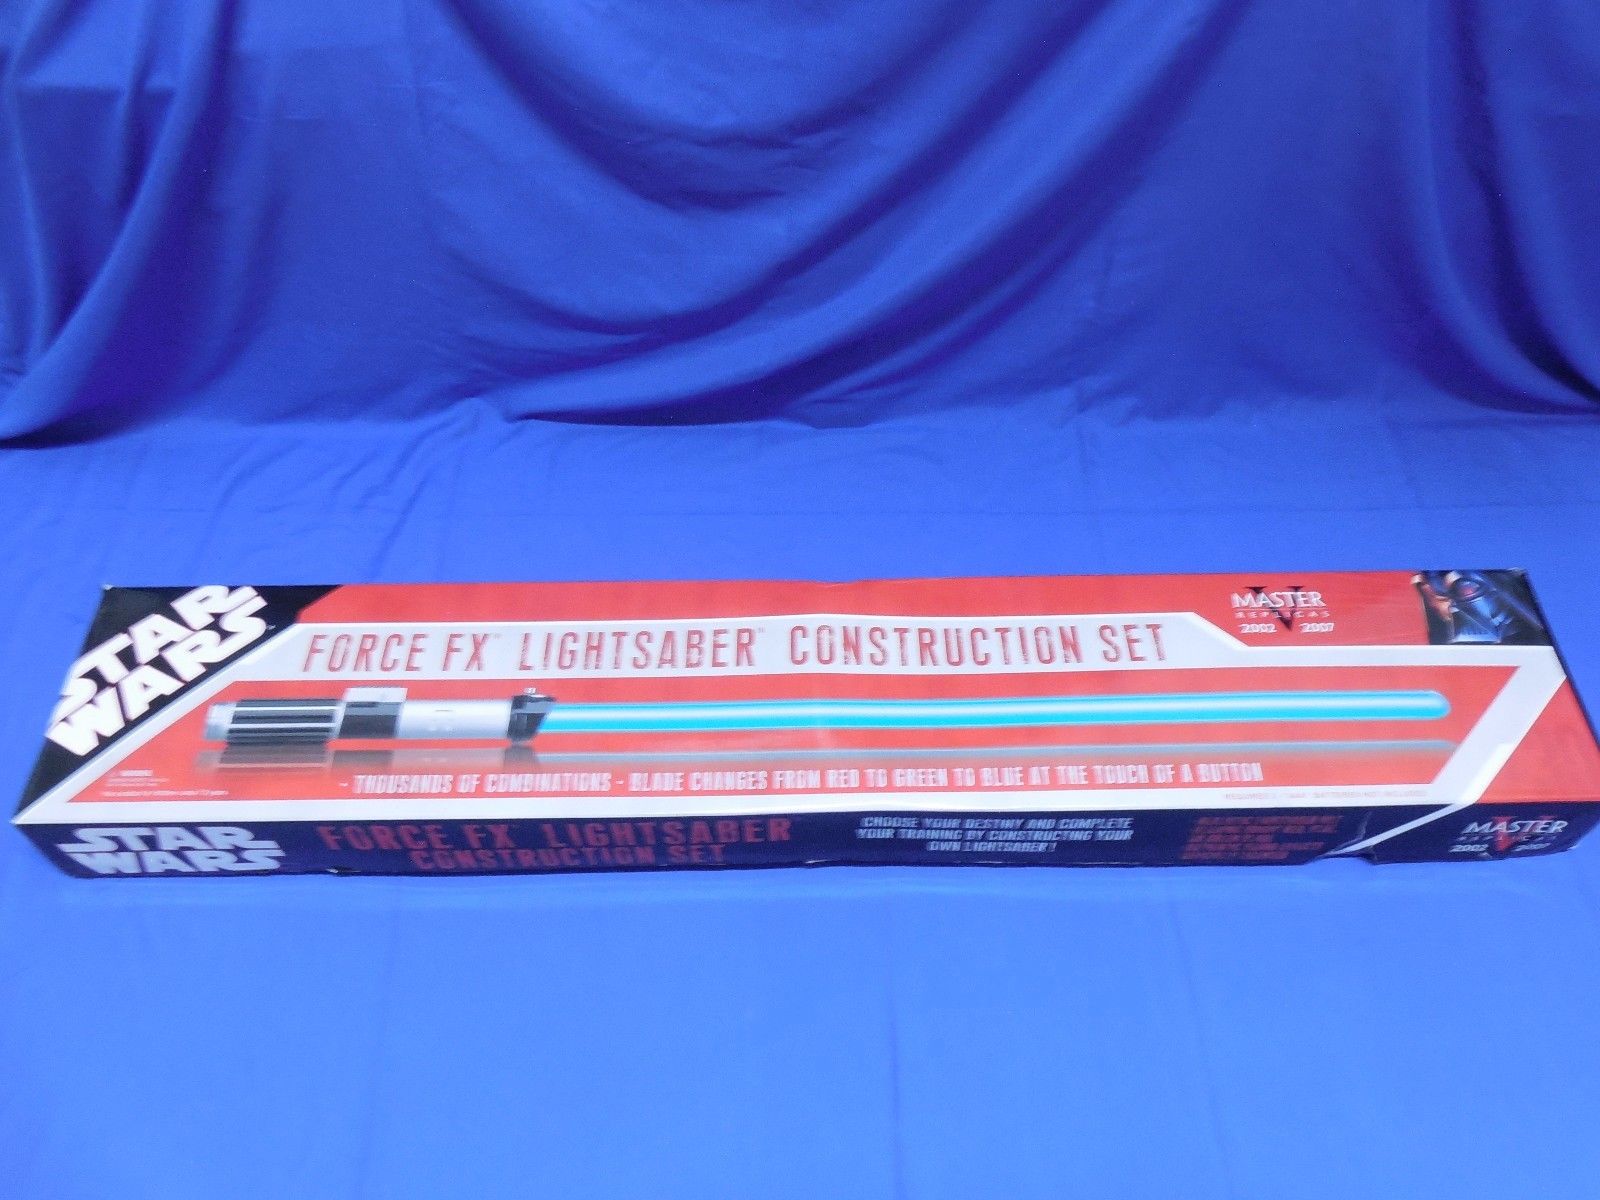 MASTER REPLICA STAR WARS FORCE FX LIGHTSABER CONSTRUCTION SET BRAND NEW IN BOX